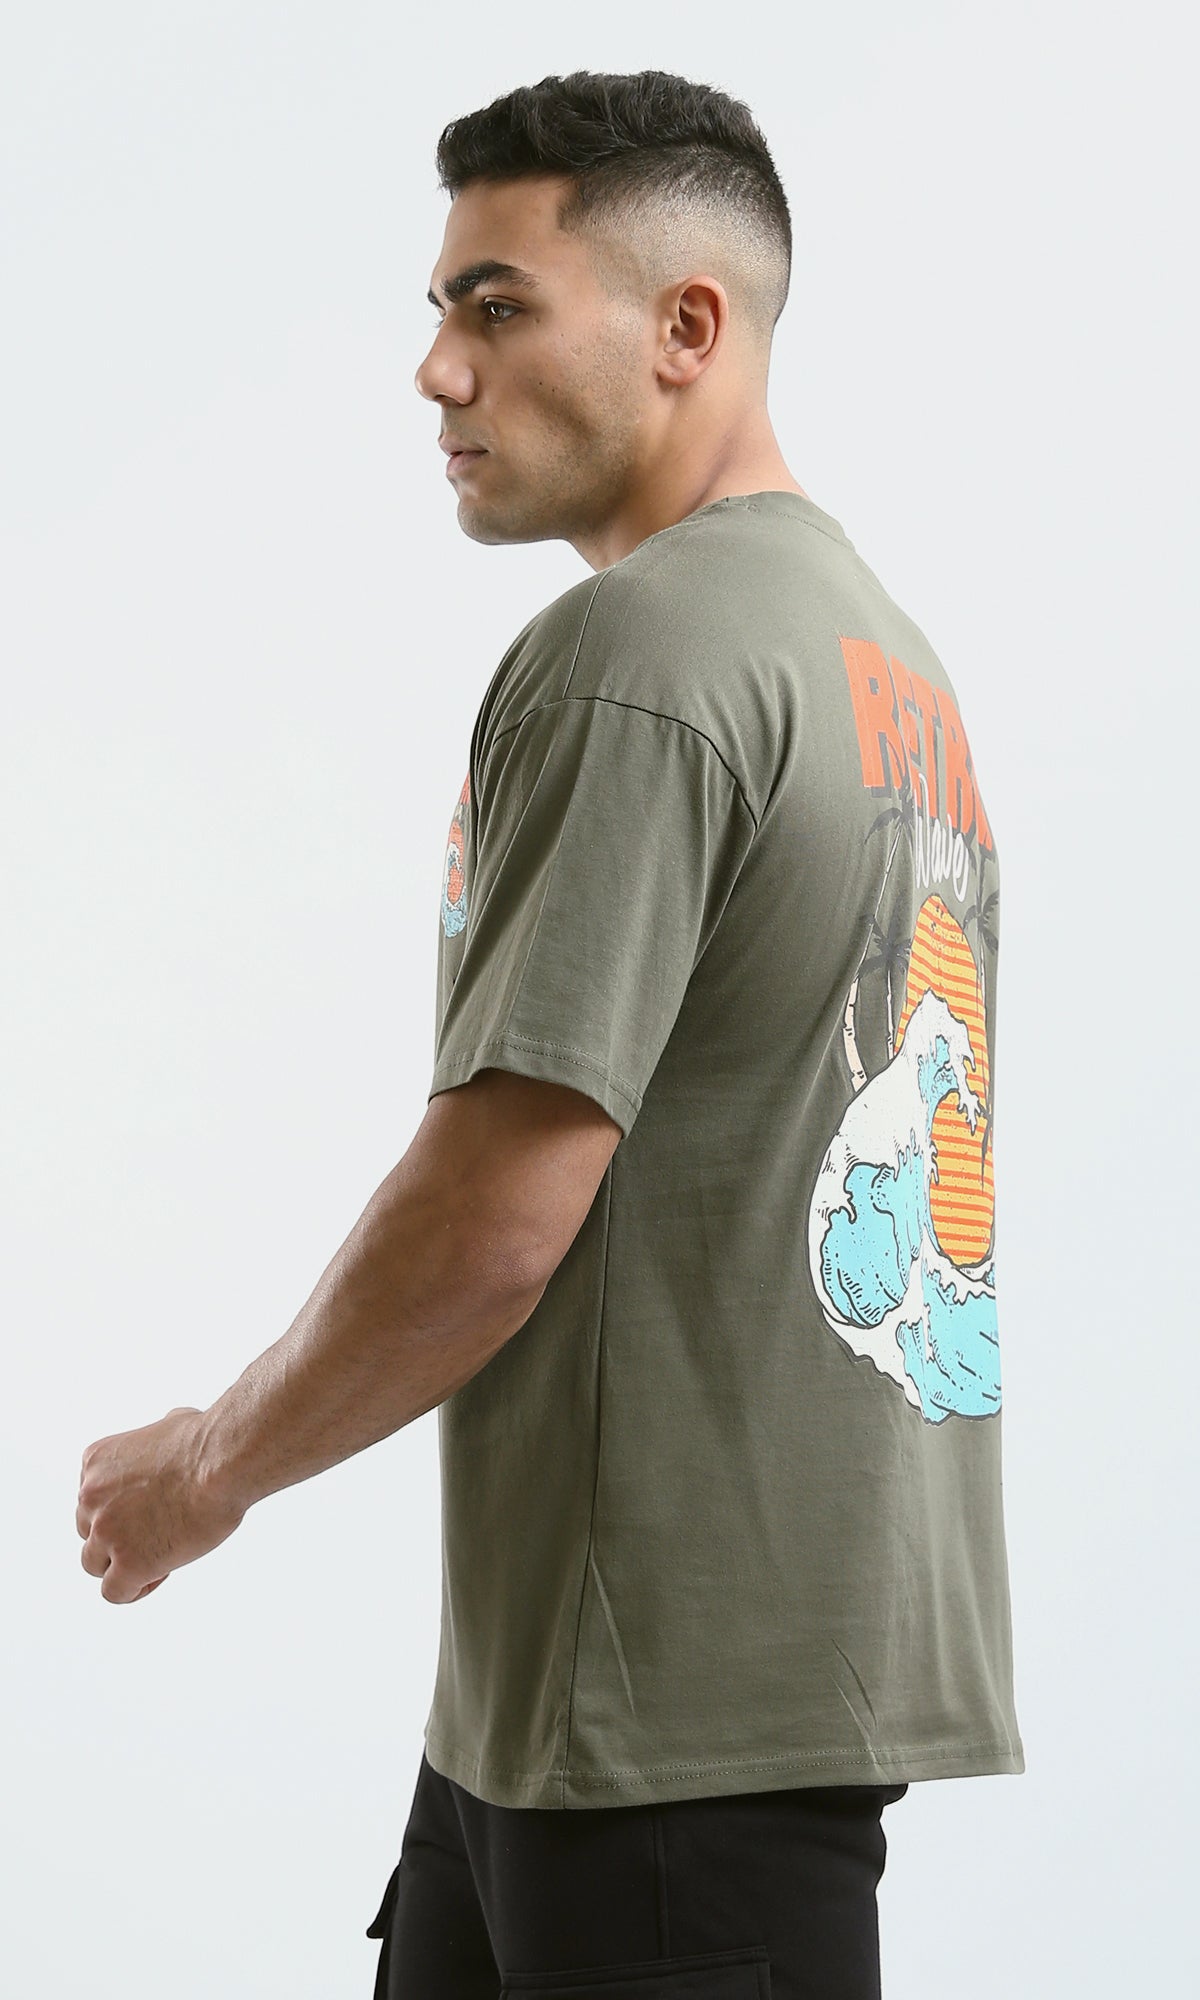 O182911 "Retro Wave" Short Sleeves Olive Casual Tee